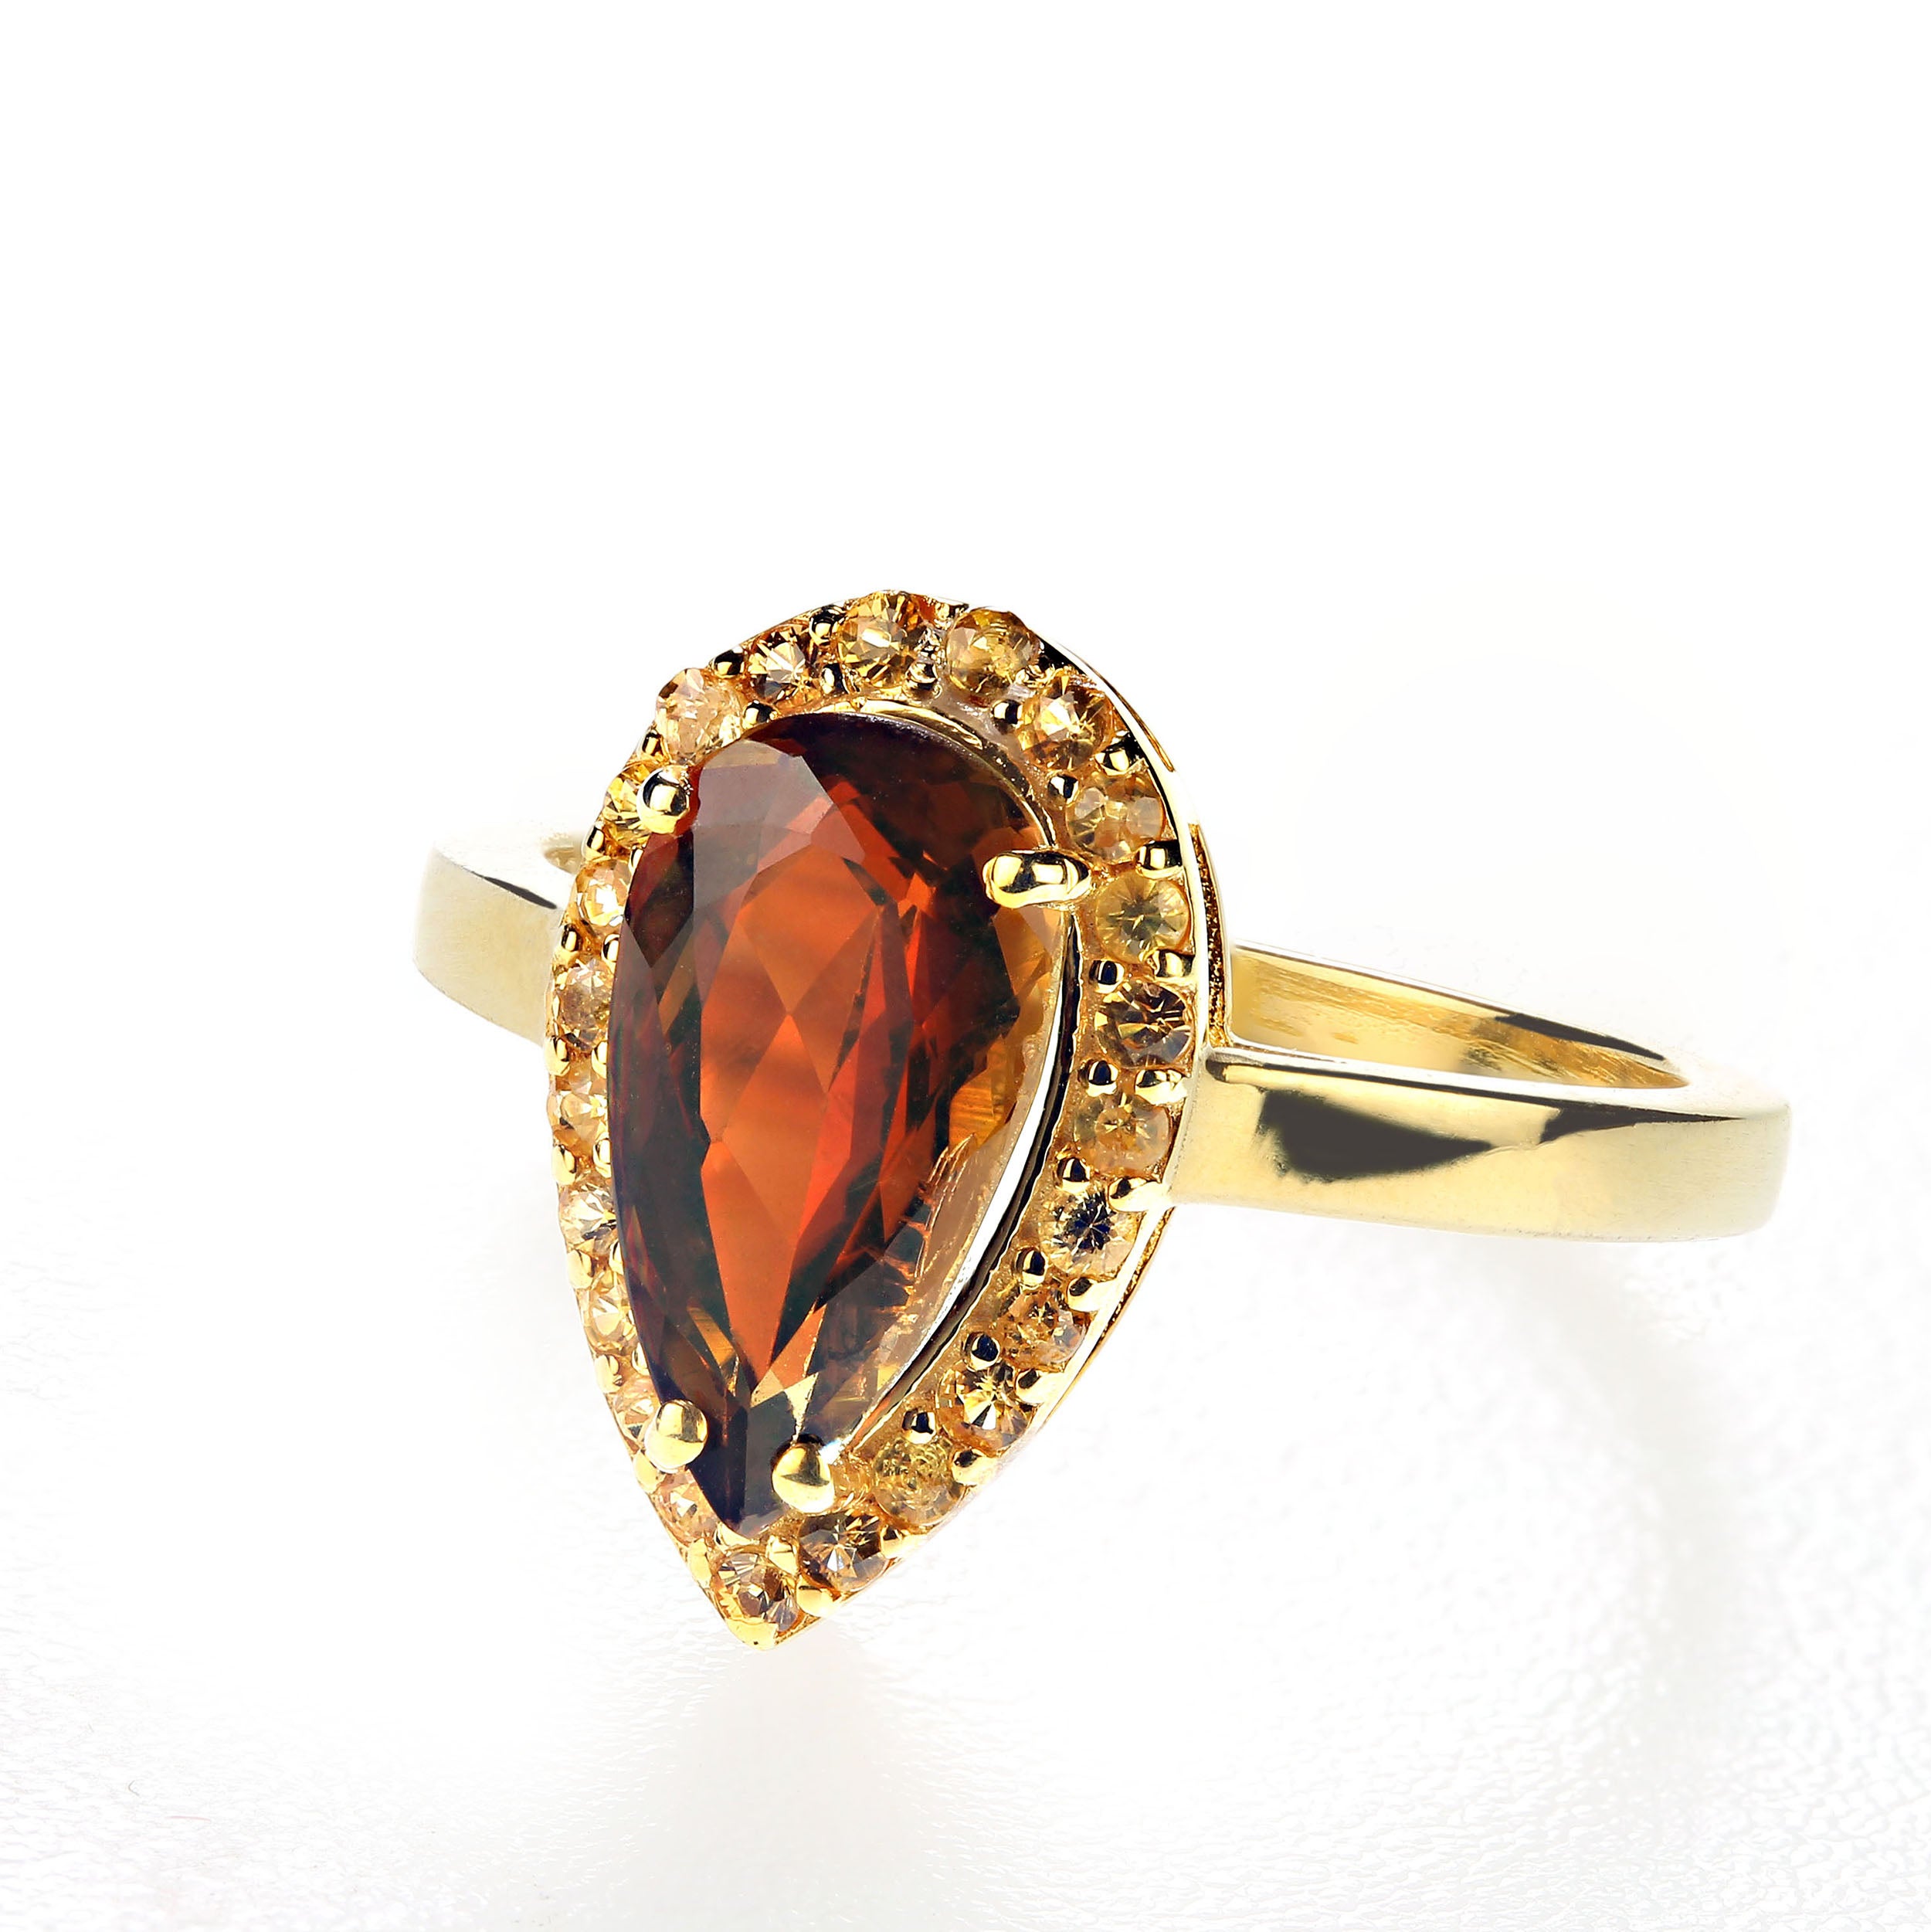 Rare Andalusite long drop custom set with yellow Sapphires in a gold over Sterling Silver ring.  This 2.73 carat gemstone is pleochroic which means that it shows different colors depending on the angle from which it is viewed. Gemstones with special